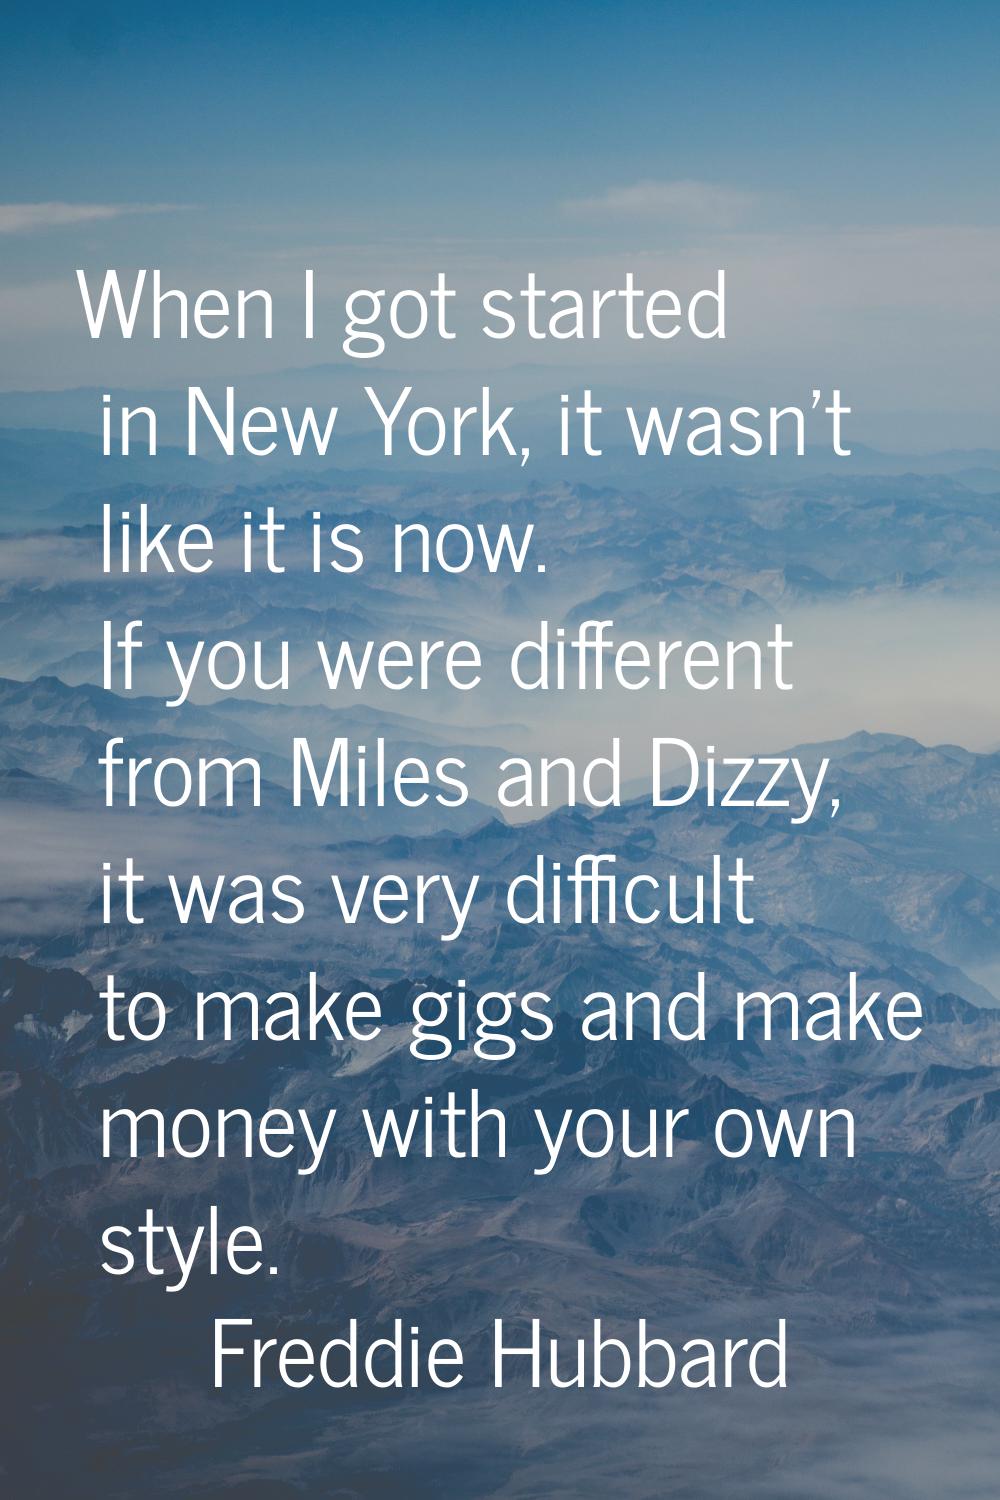 When I got started in New York, it wasn't like it is now. If you were different from Miles and Dizz